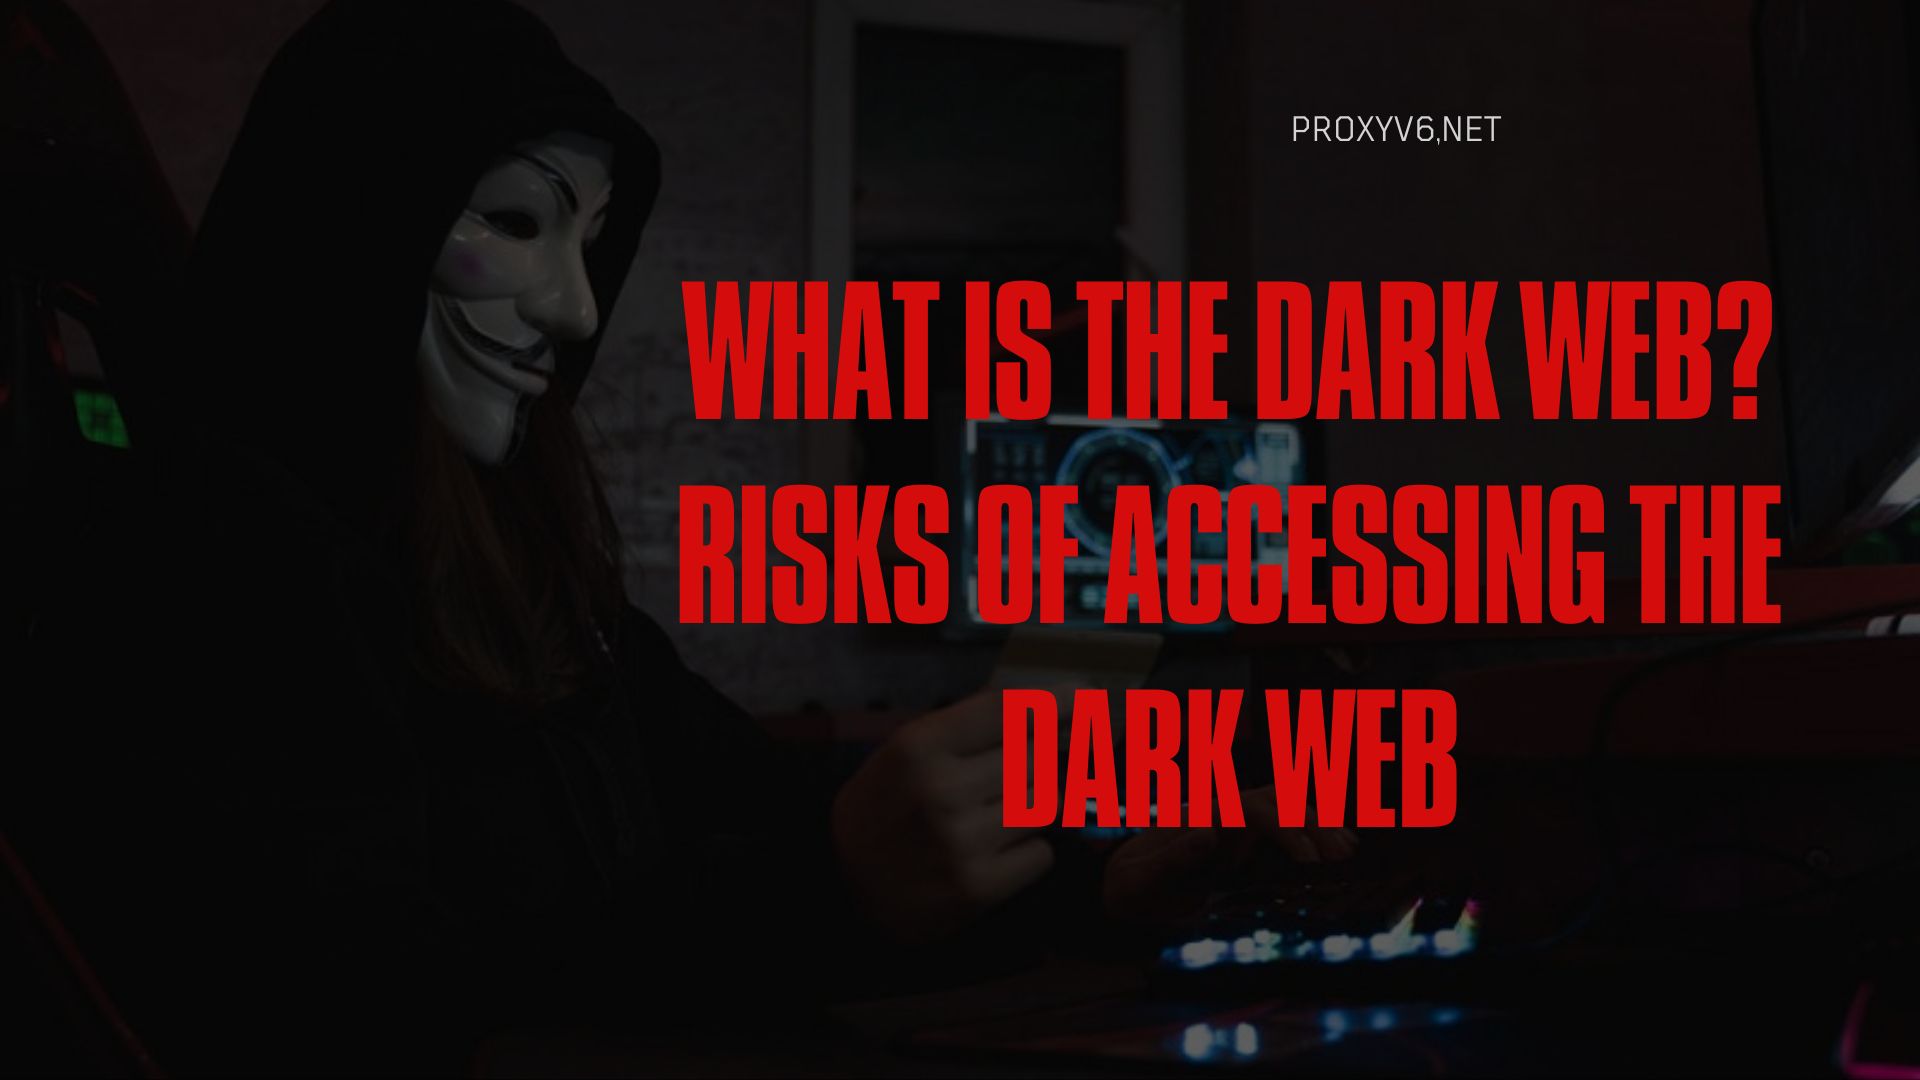 What is the dark web? Risks of accessing the dark web